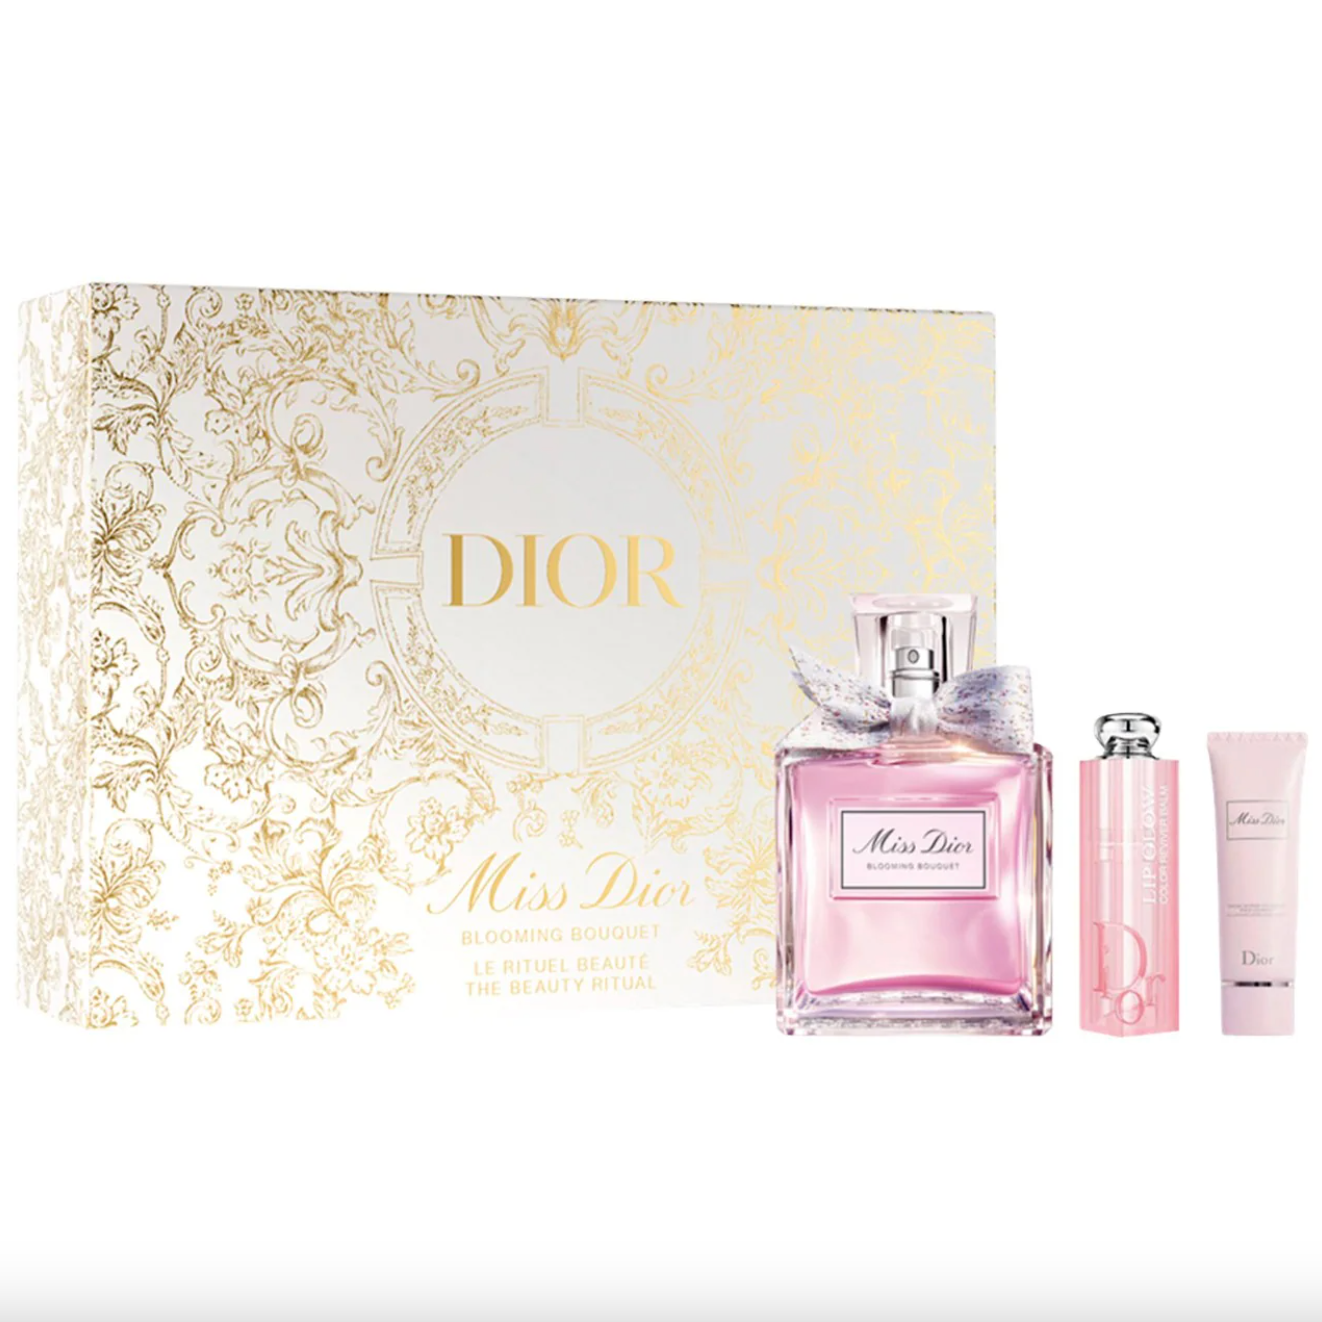 10 Mother's Day Fragrance Gift Sets • Scent Lodge